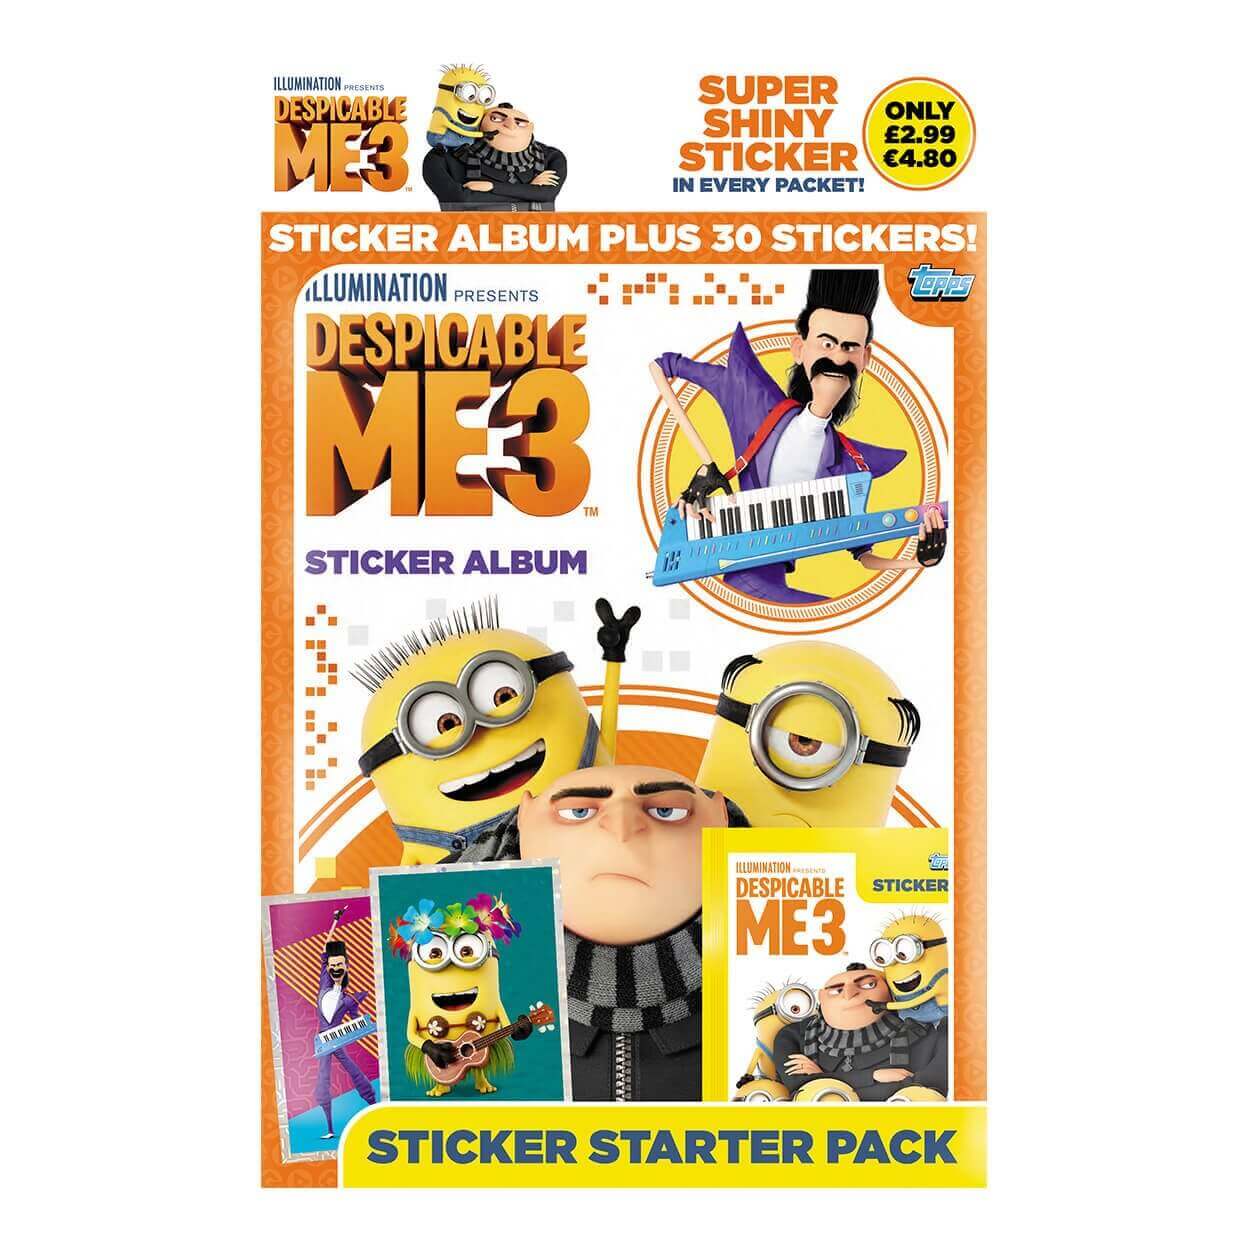 Topps Despicable Me 3 Sticker Collection Product: Starter Pack (30 Stickers) Sticker Collection Earthlets